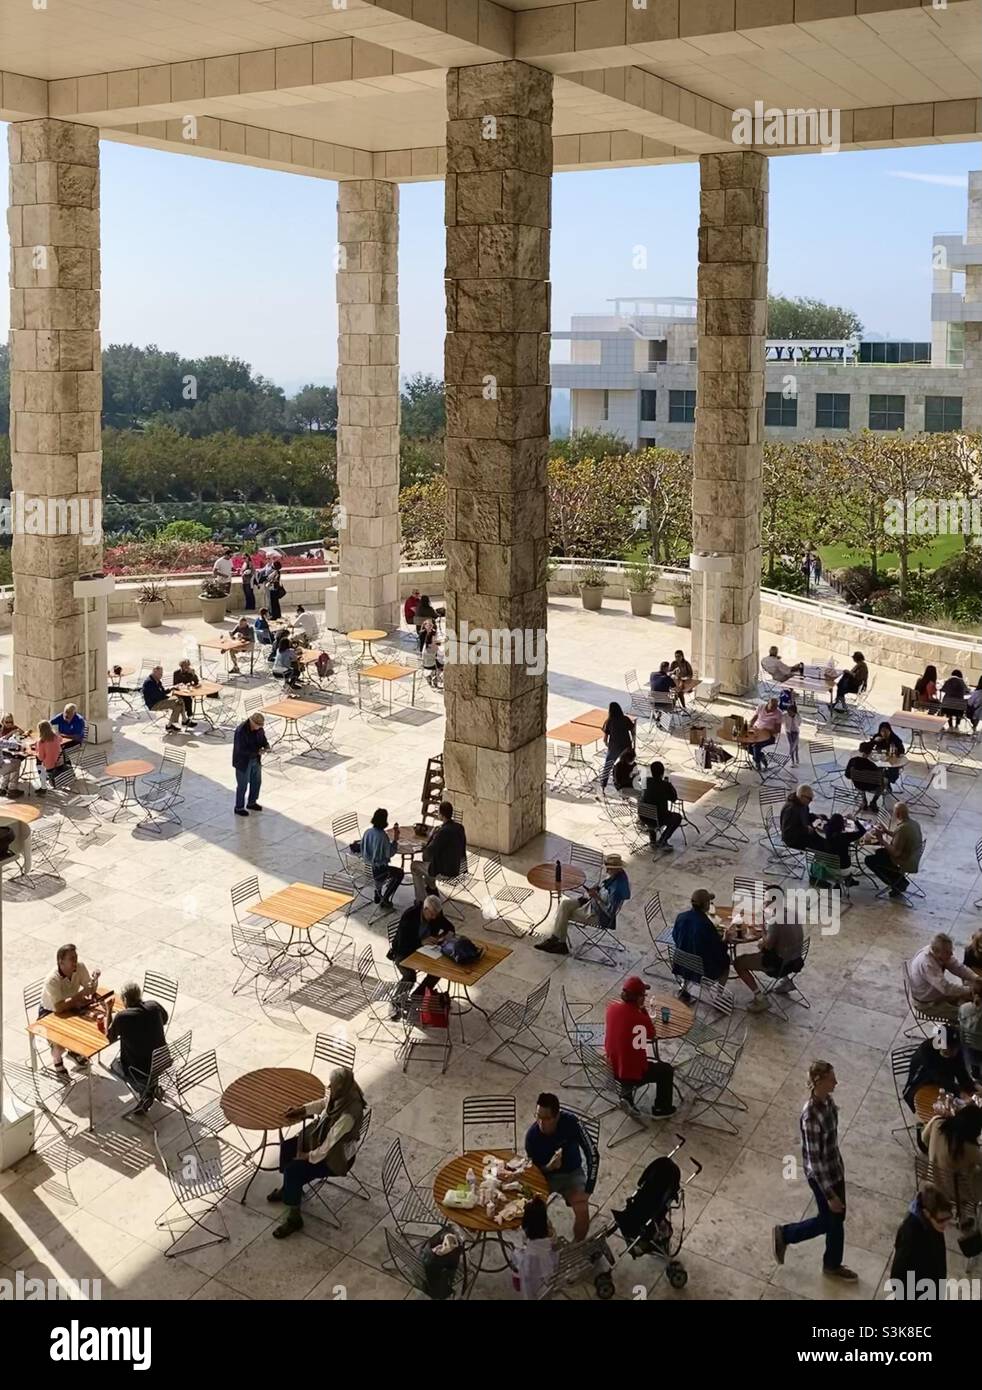 Outdoo Eating Area at the Getty Center Stock Photo